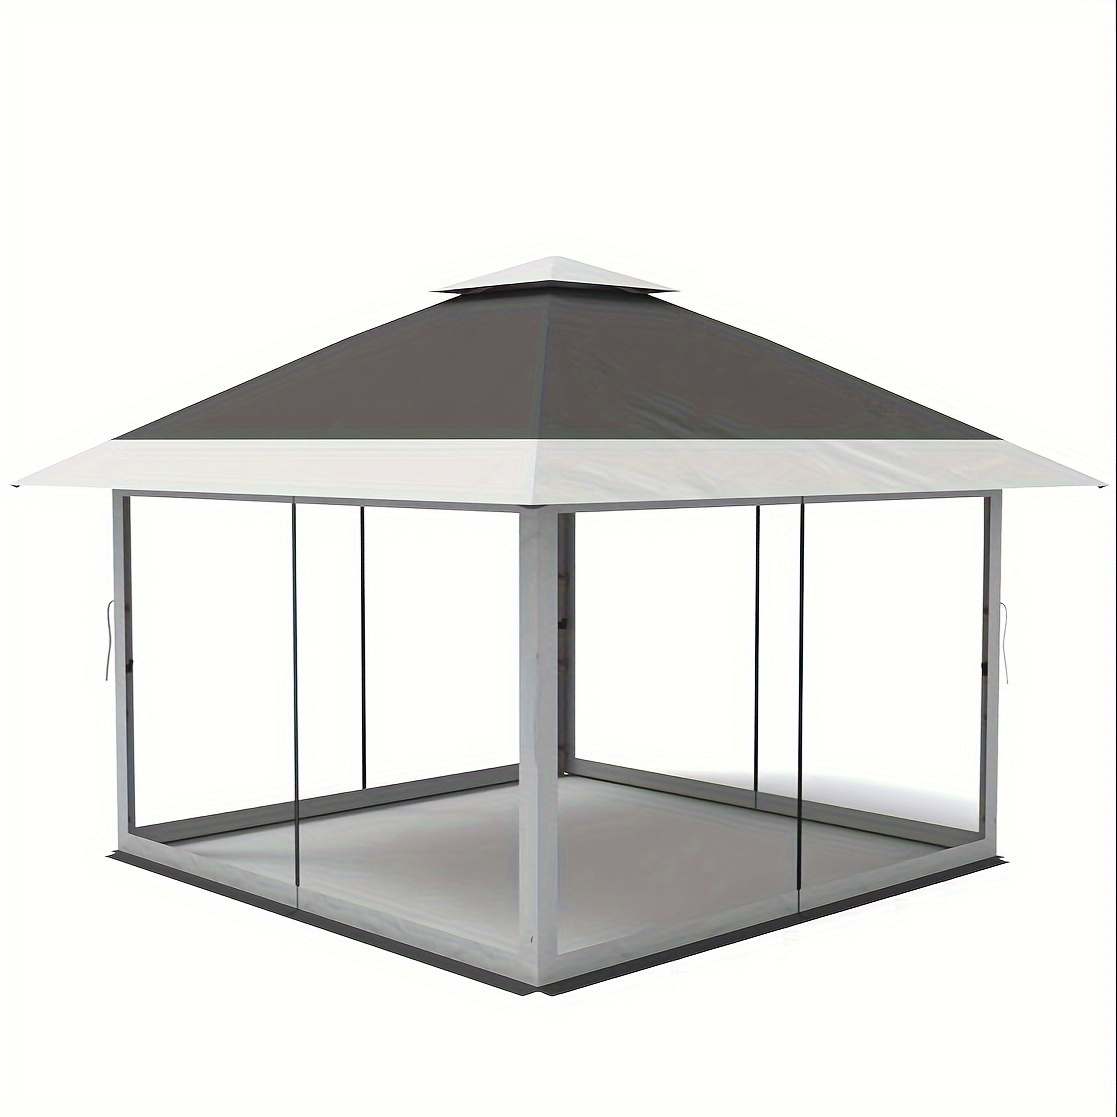 

Pop Up Gazebo Outdoor Canopy Shelter With Mosquito Netting 4 Stanbags Instant For Lawn, Garden, Backyard, Deck